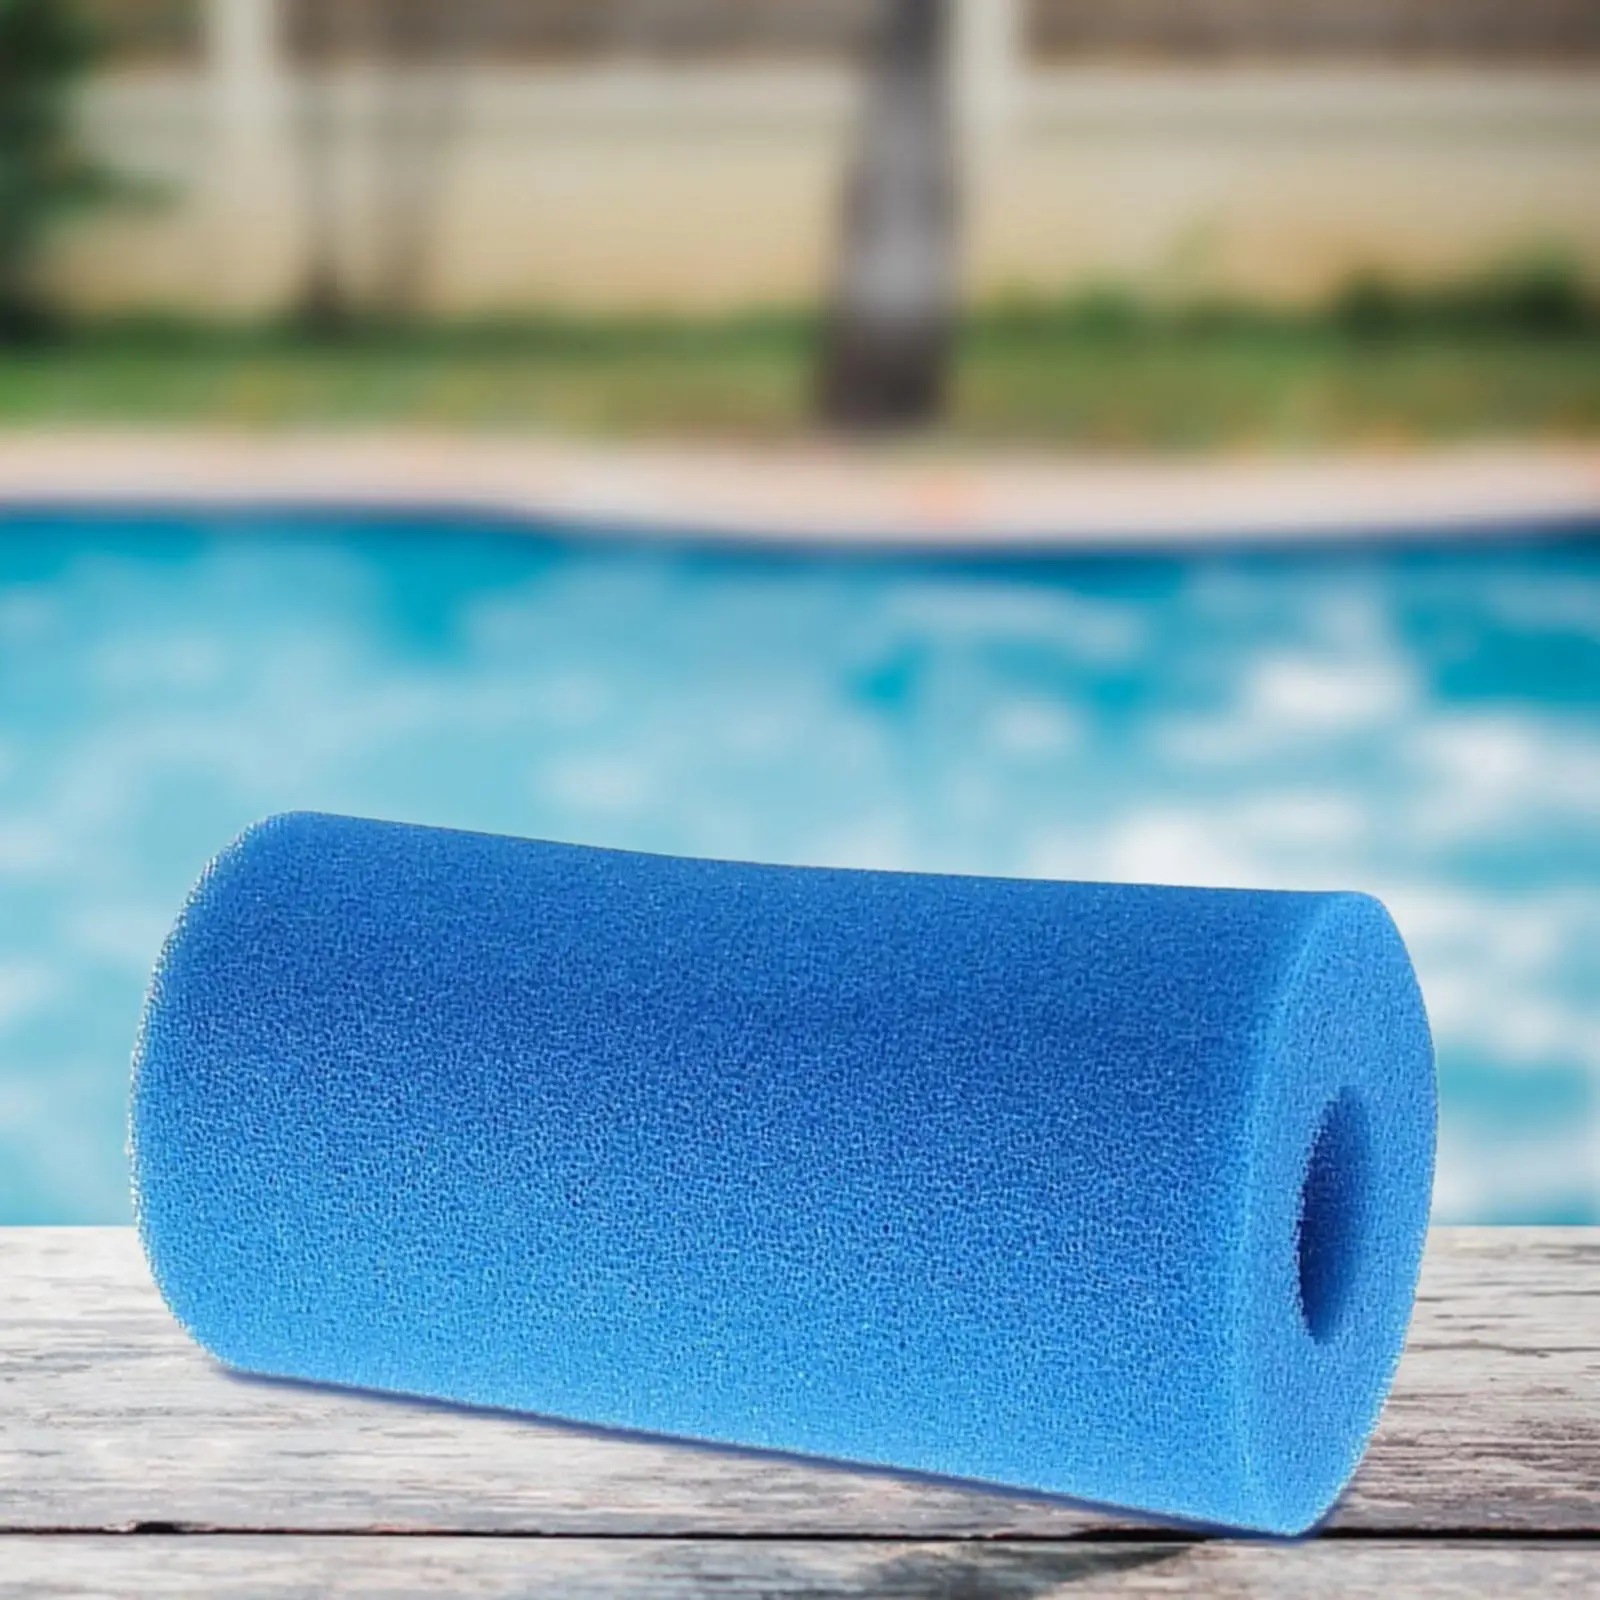 Pool Filter Cartridge Swimming Pool Filter Foam Reusable Easy to Clean Durable Pool Sponge Filter Directly Replace for Type B